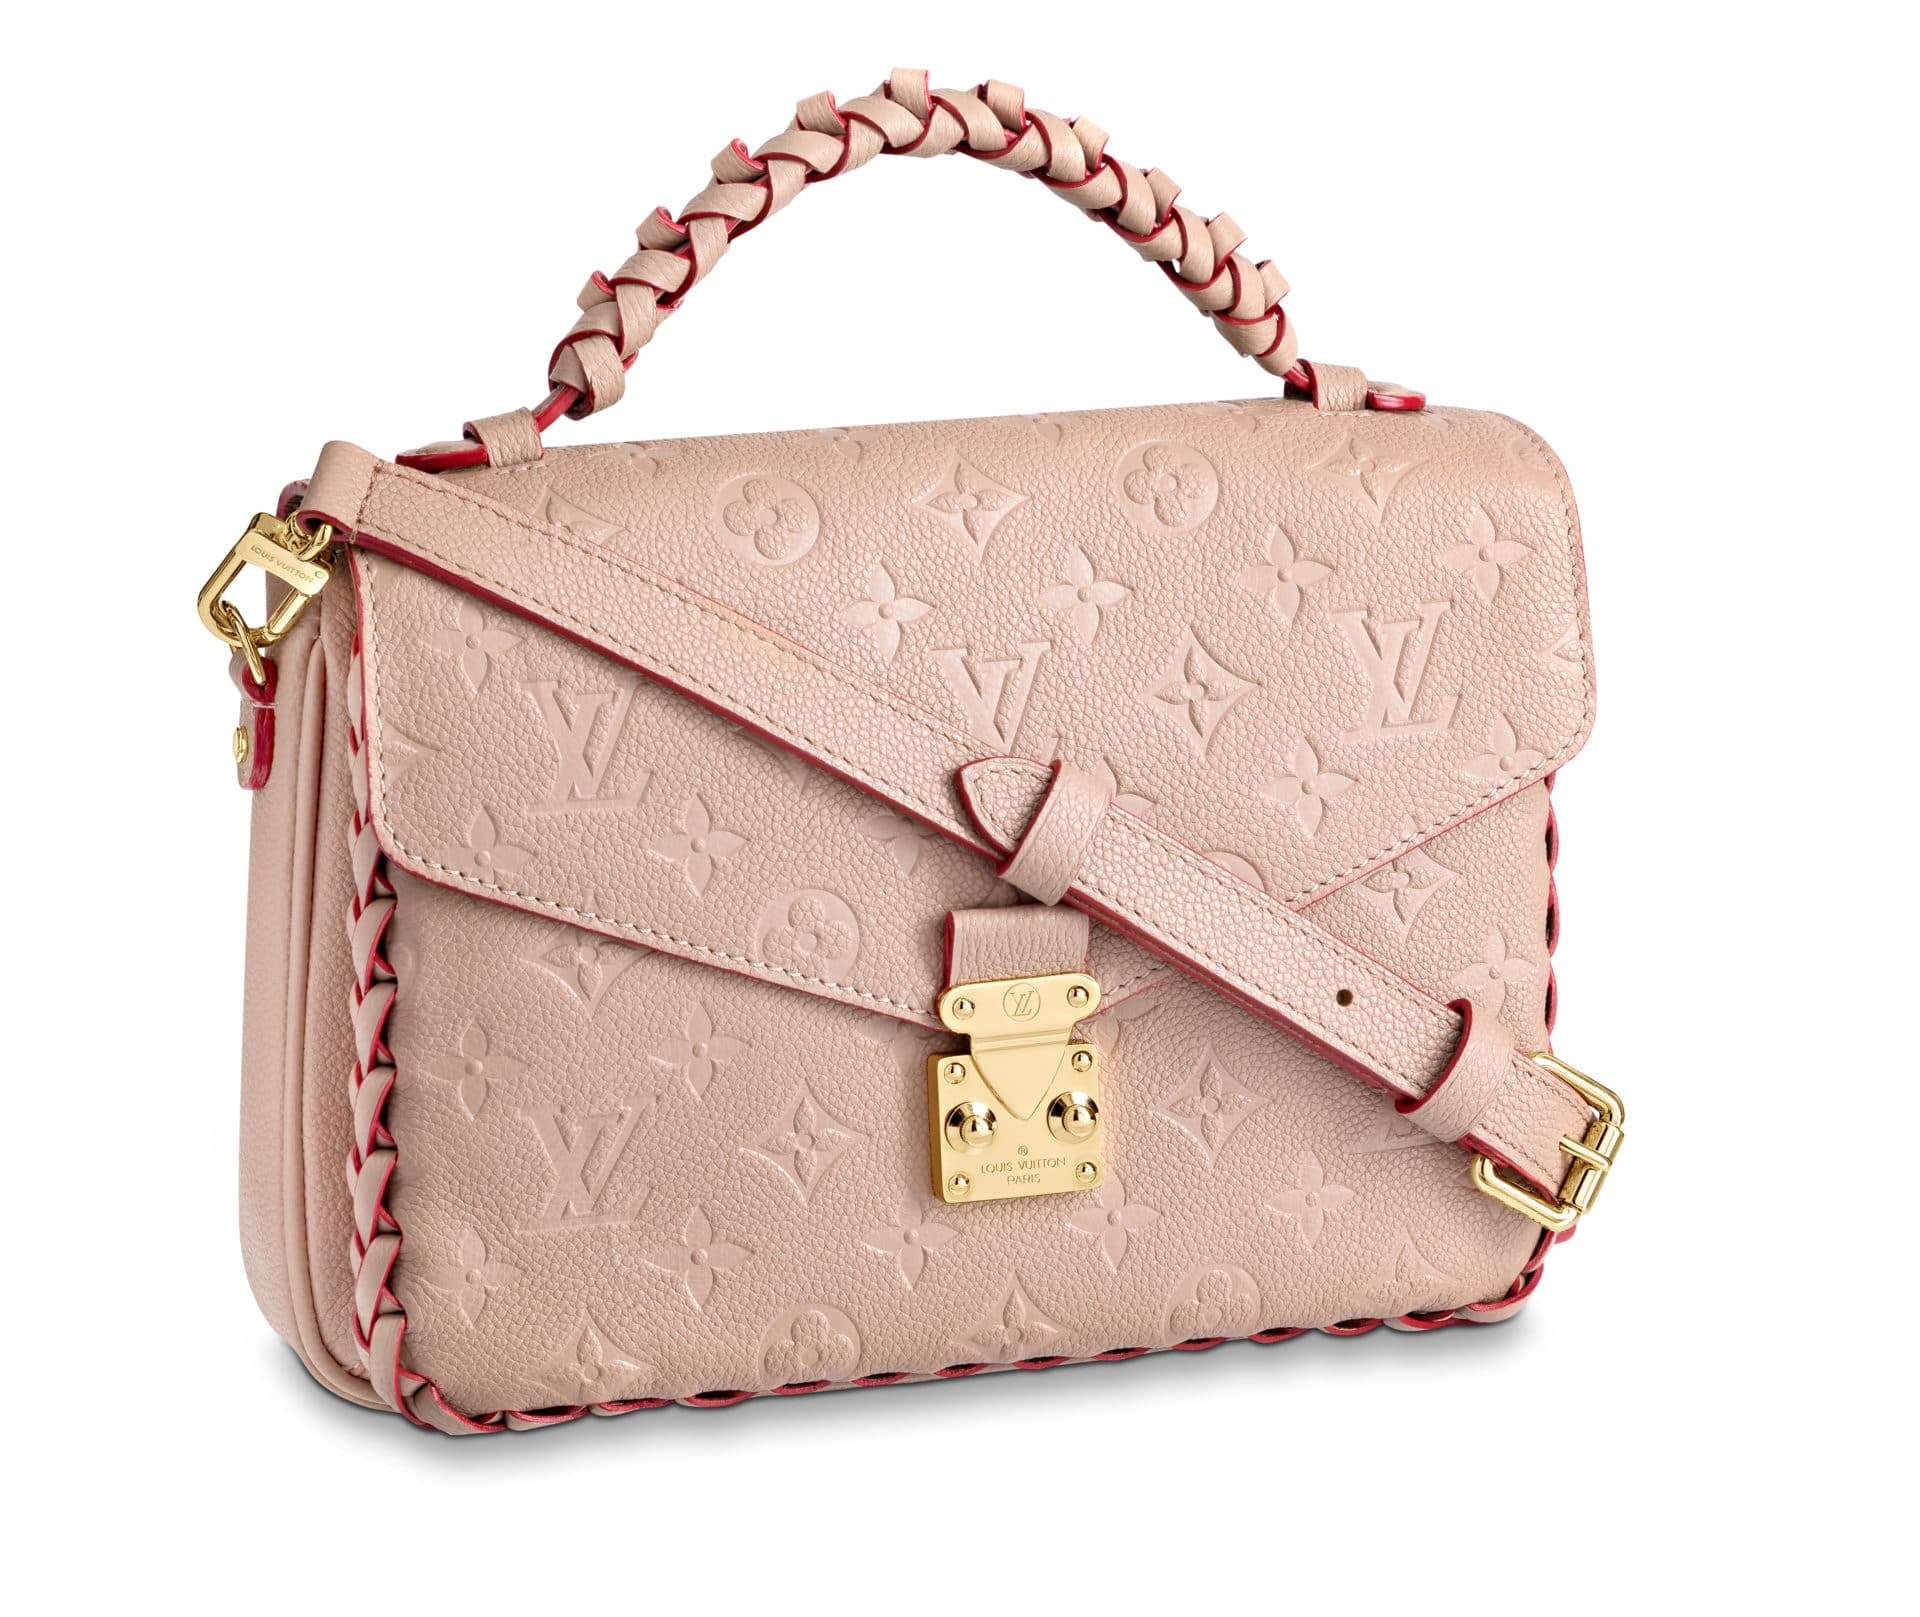 16 LOUIS VUITTON HANDBAGS THAT ARE WORTH IT *Buy These